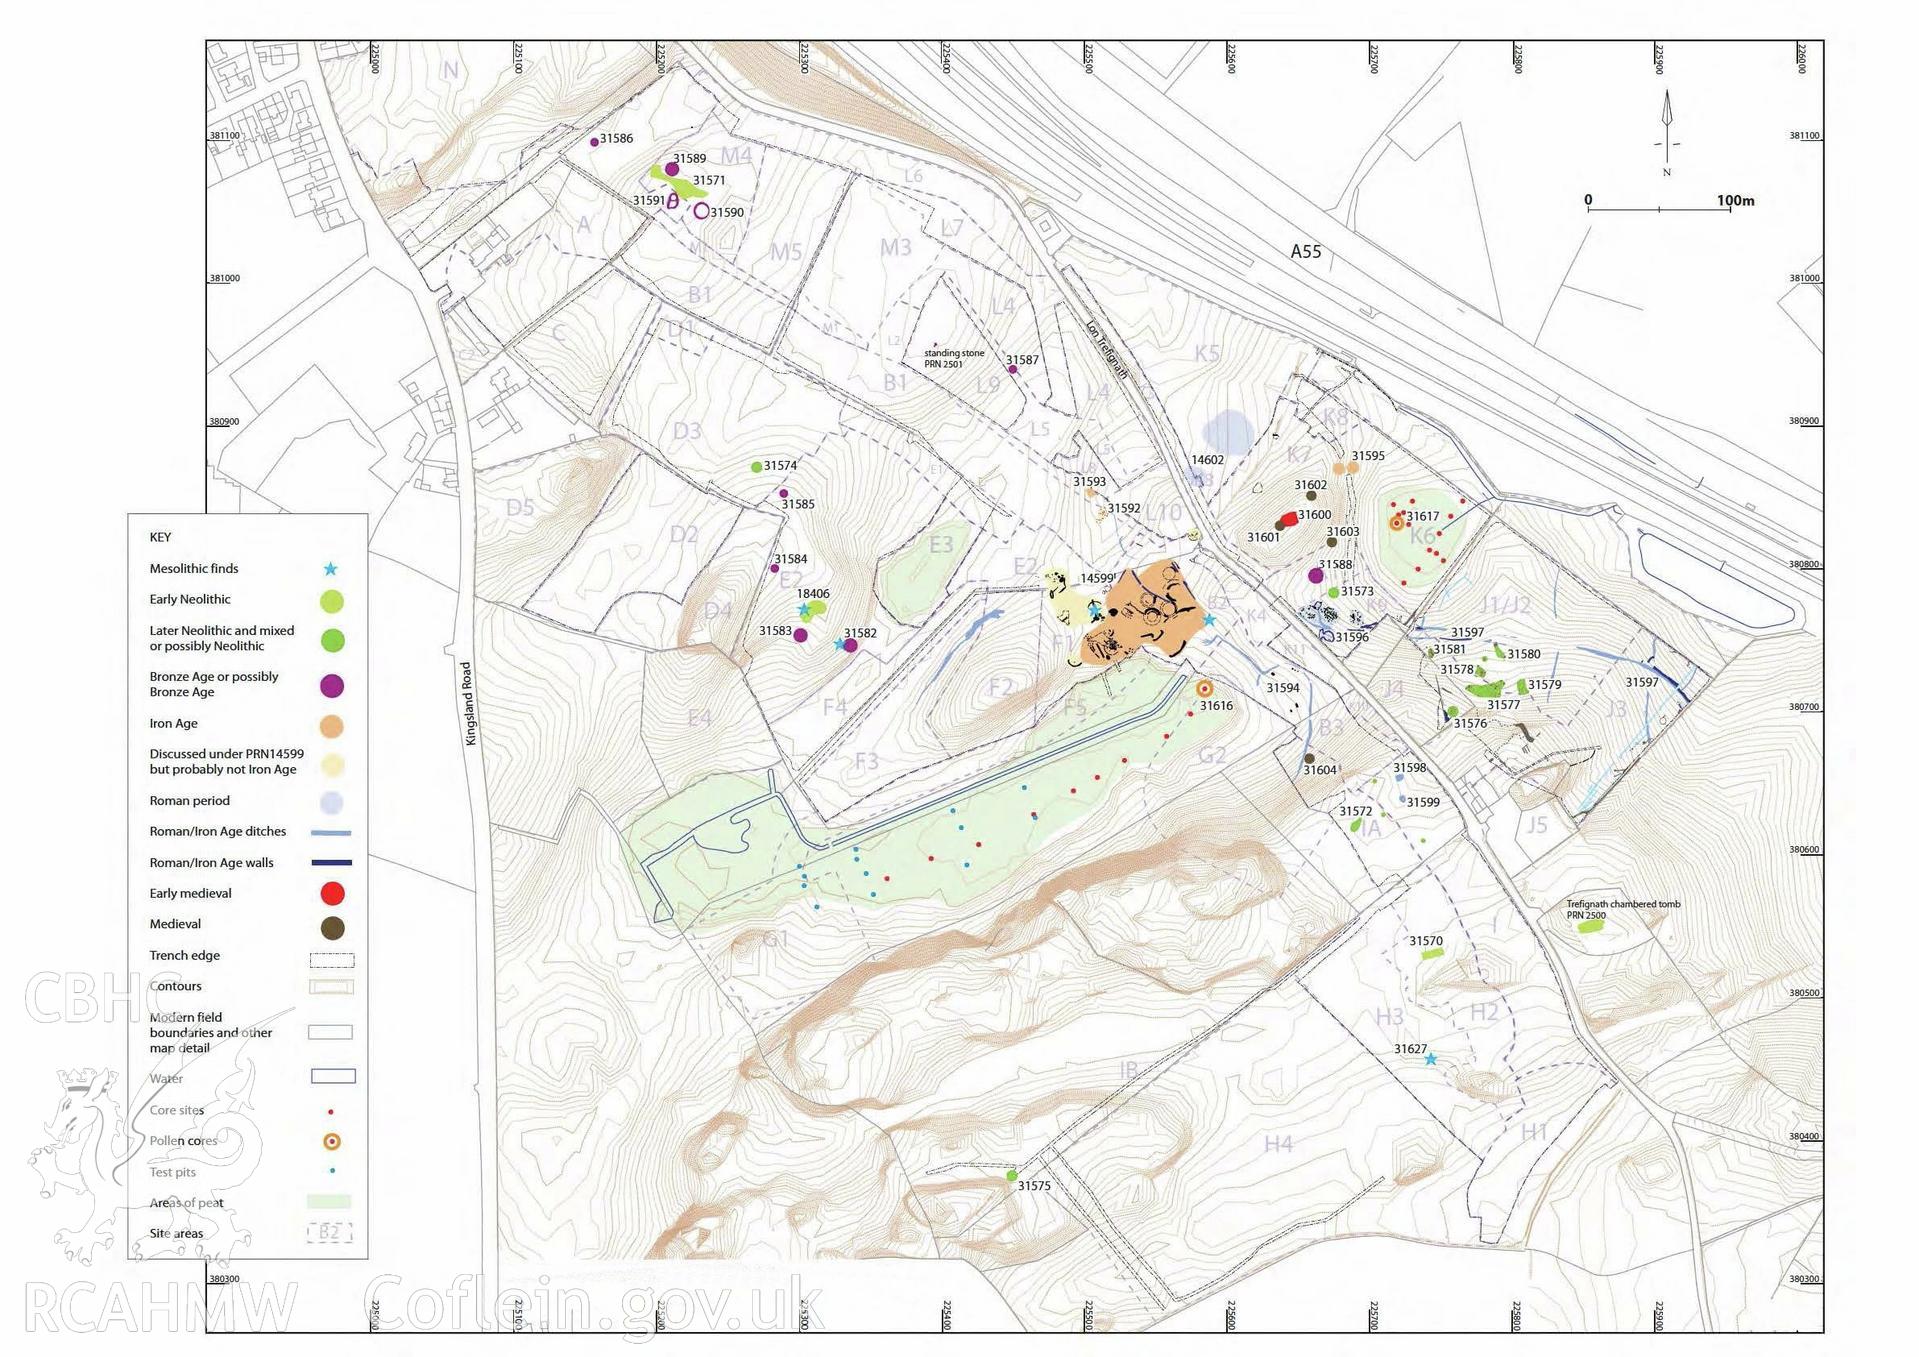 Location plan of prehistoric, Roman and medieval sites at Parc Cybi Enterprise Zone, Holyhead, Anglesey. Included in material used as part of Archaeology Wales' heritage impact assessment of the site, conducted in 2017. Project number: P2522.